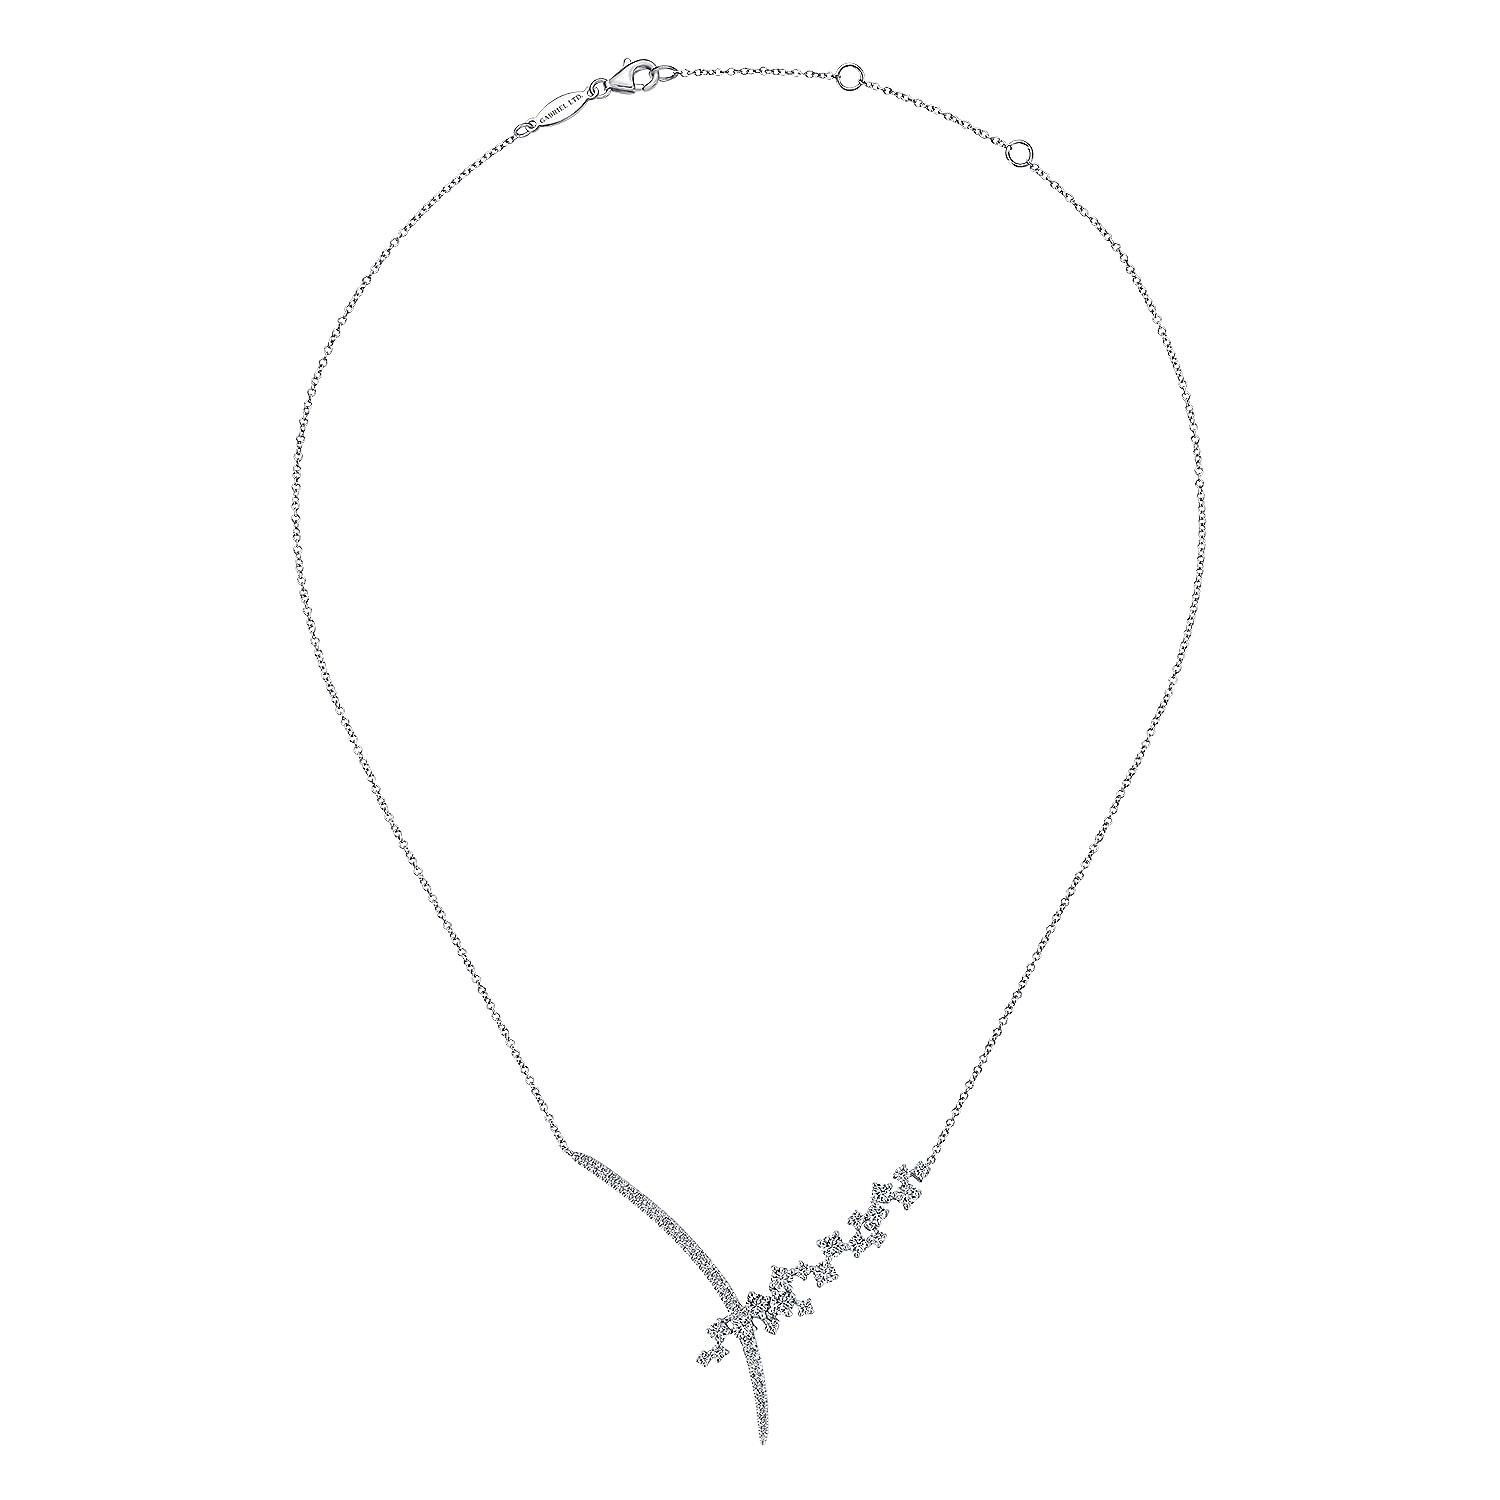 18K White Gold Criss Crossing Diamond Cluster Lariat Necklace